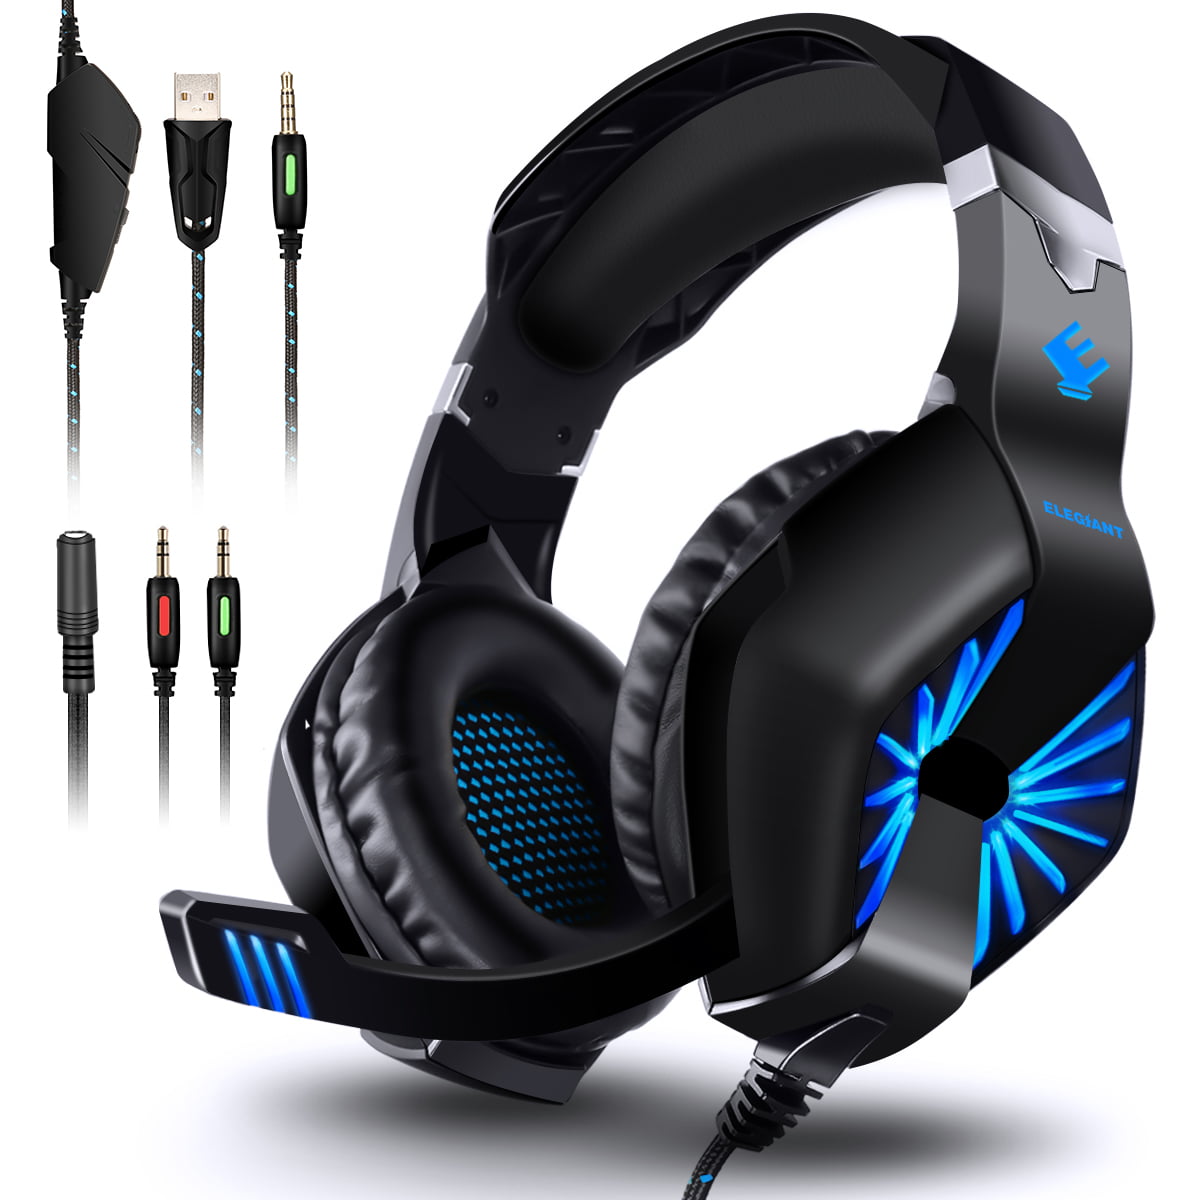 Gaming Headset, Gamer Headphone Headset Noise-Canceling Stereo Bass with Mic Adjustable 3.5mm Jack USB LED Light for Video Games Switch PS4 Computer Tablet PC Smartephone